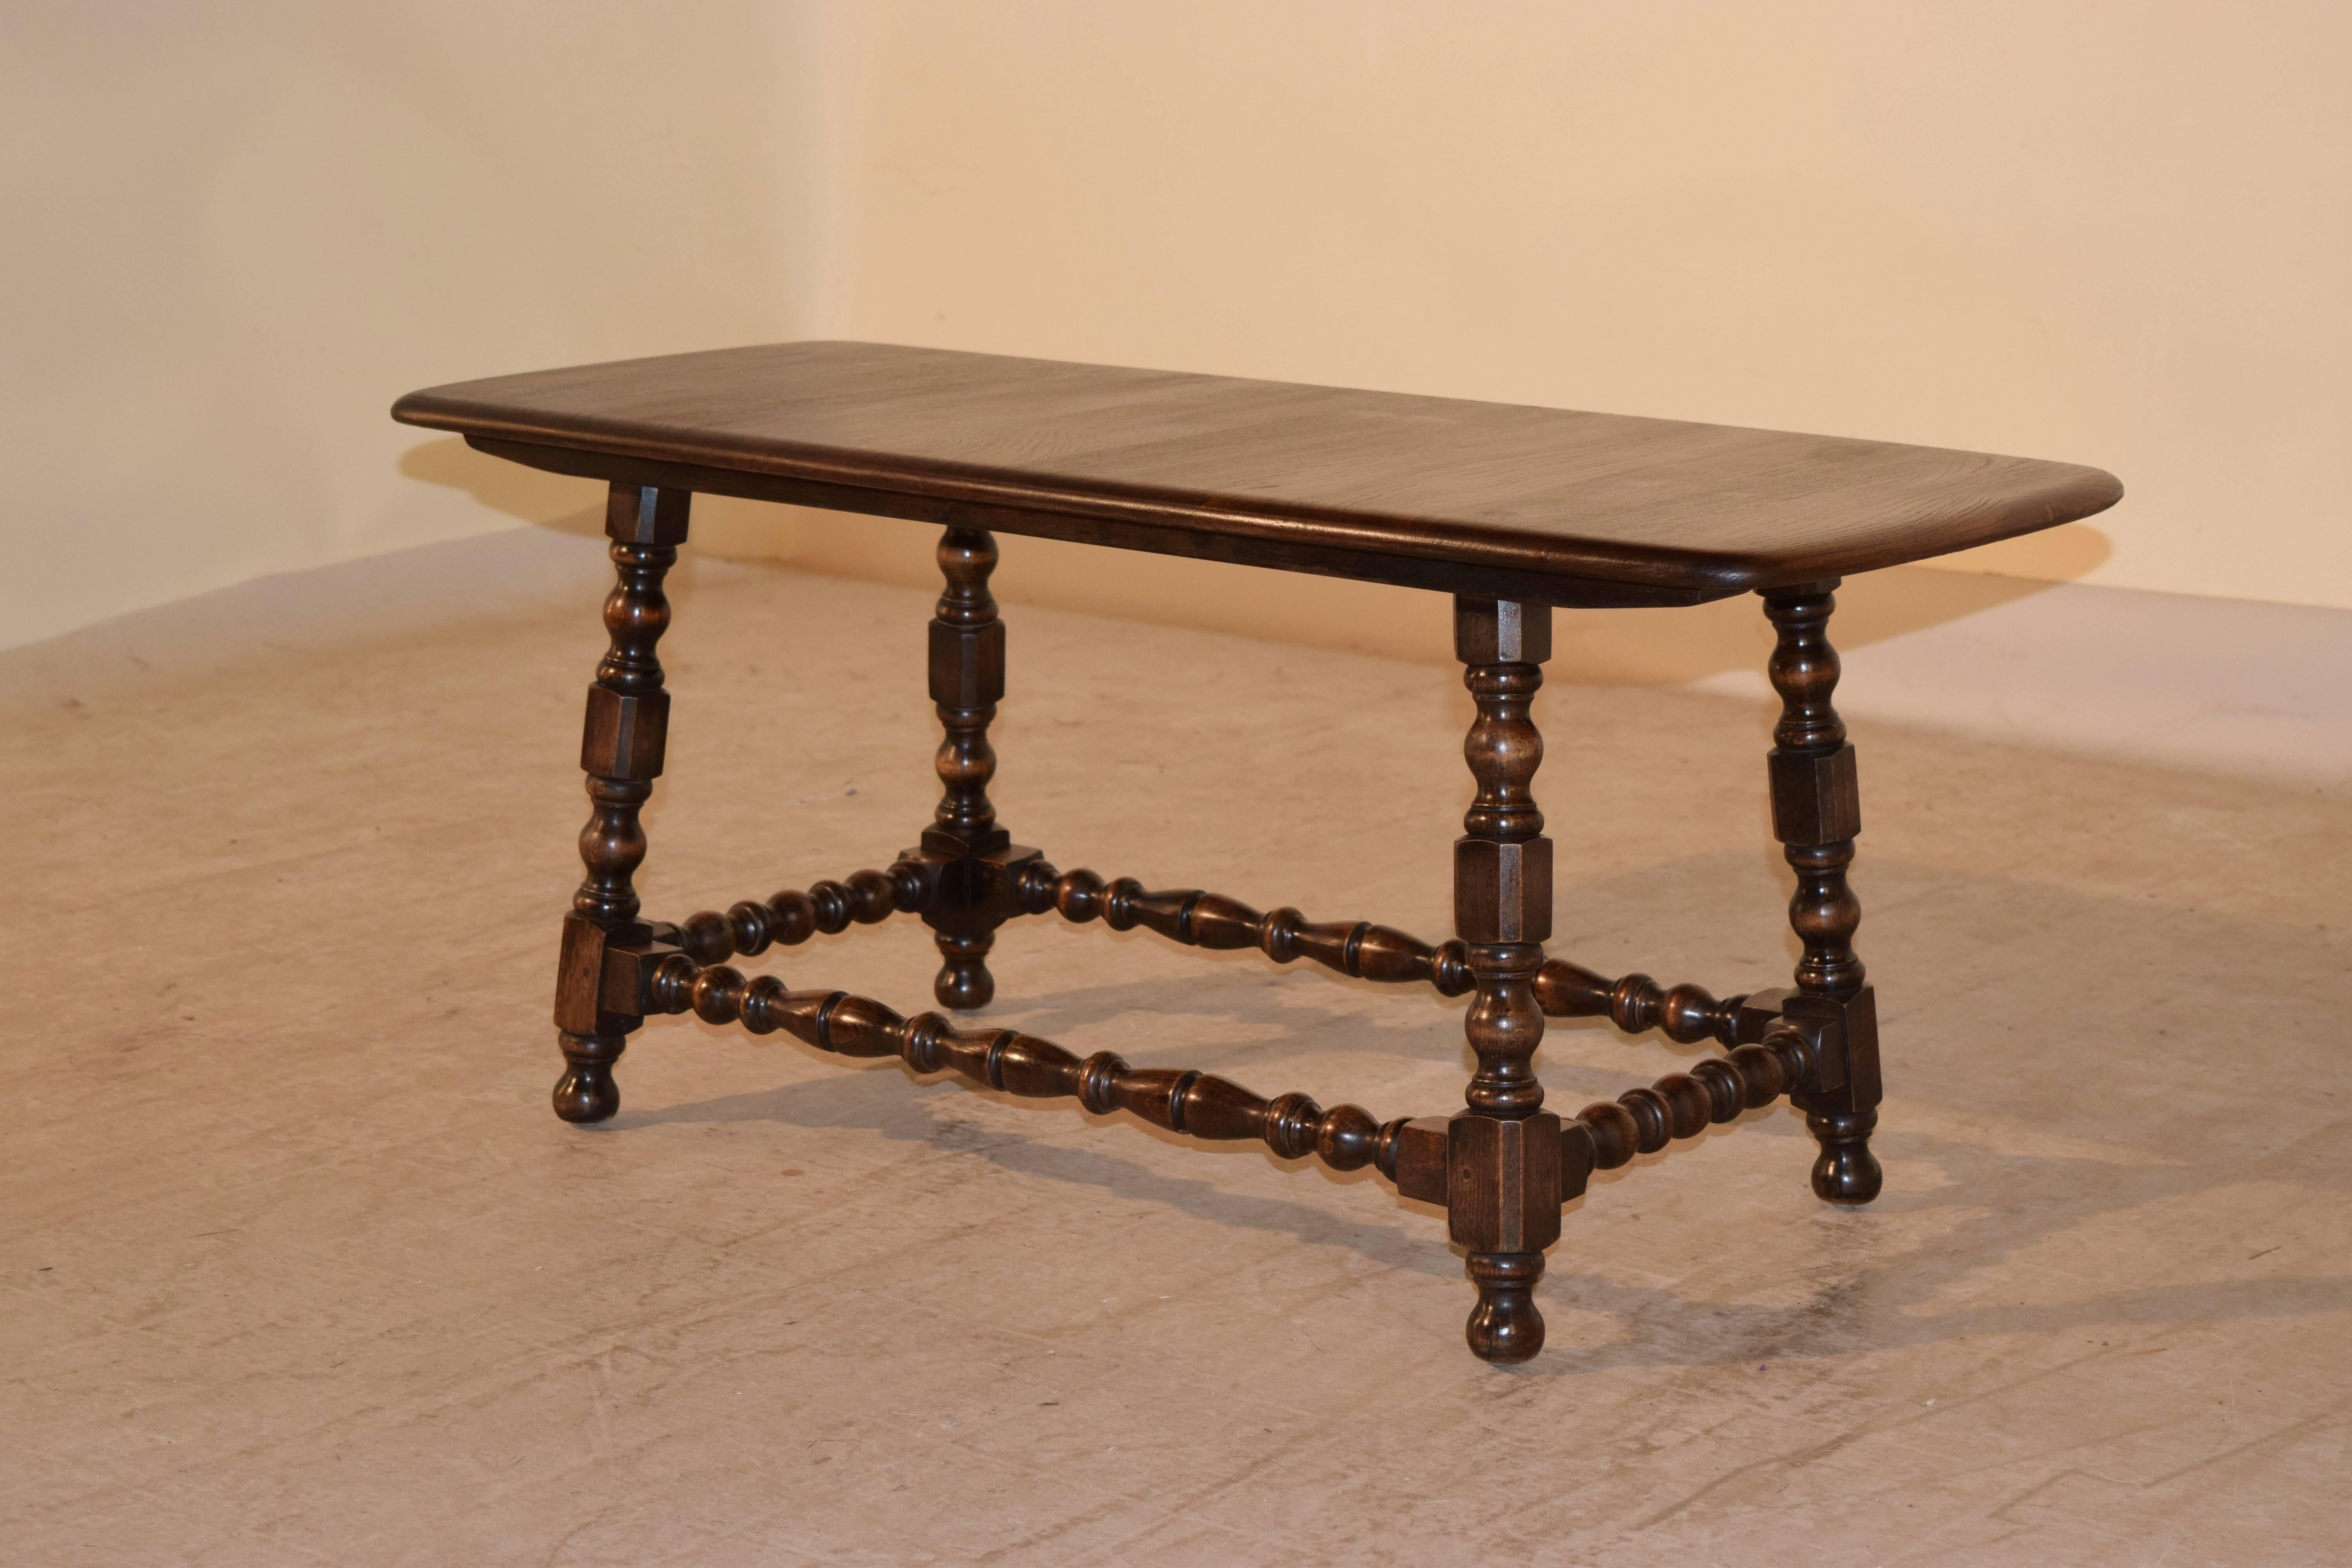 Mid-20th century English coffee table with a finely grained elm top, supported on turned oak legs, which are joined by matching stretchers and turned feet.